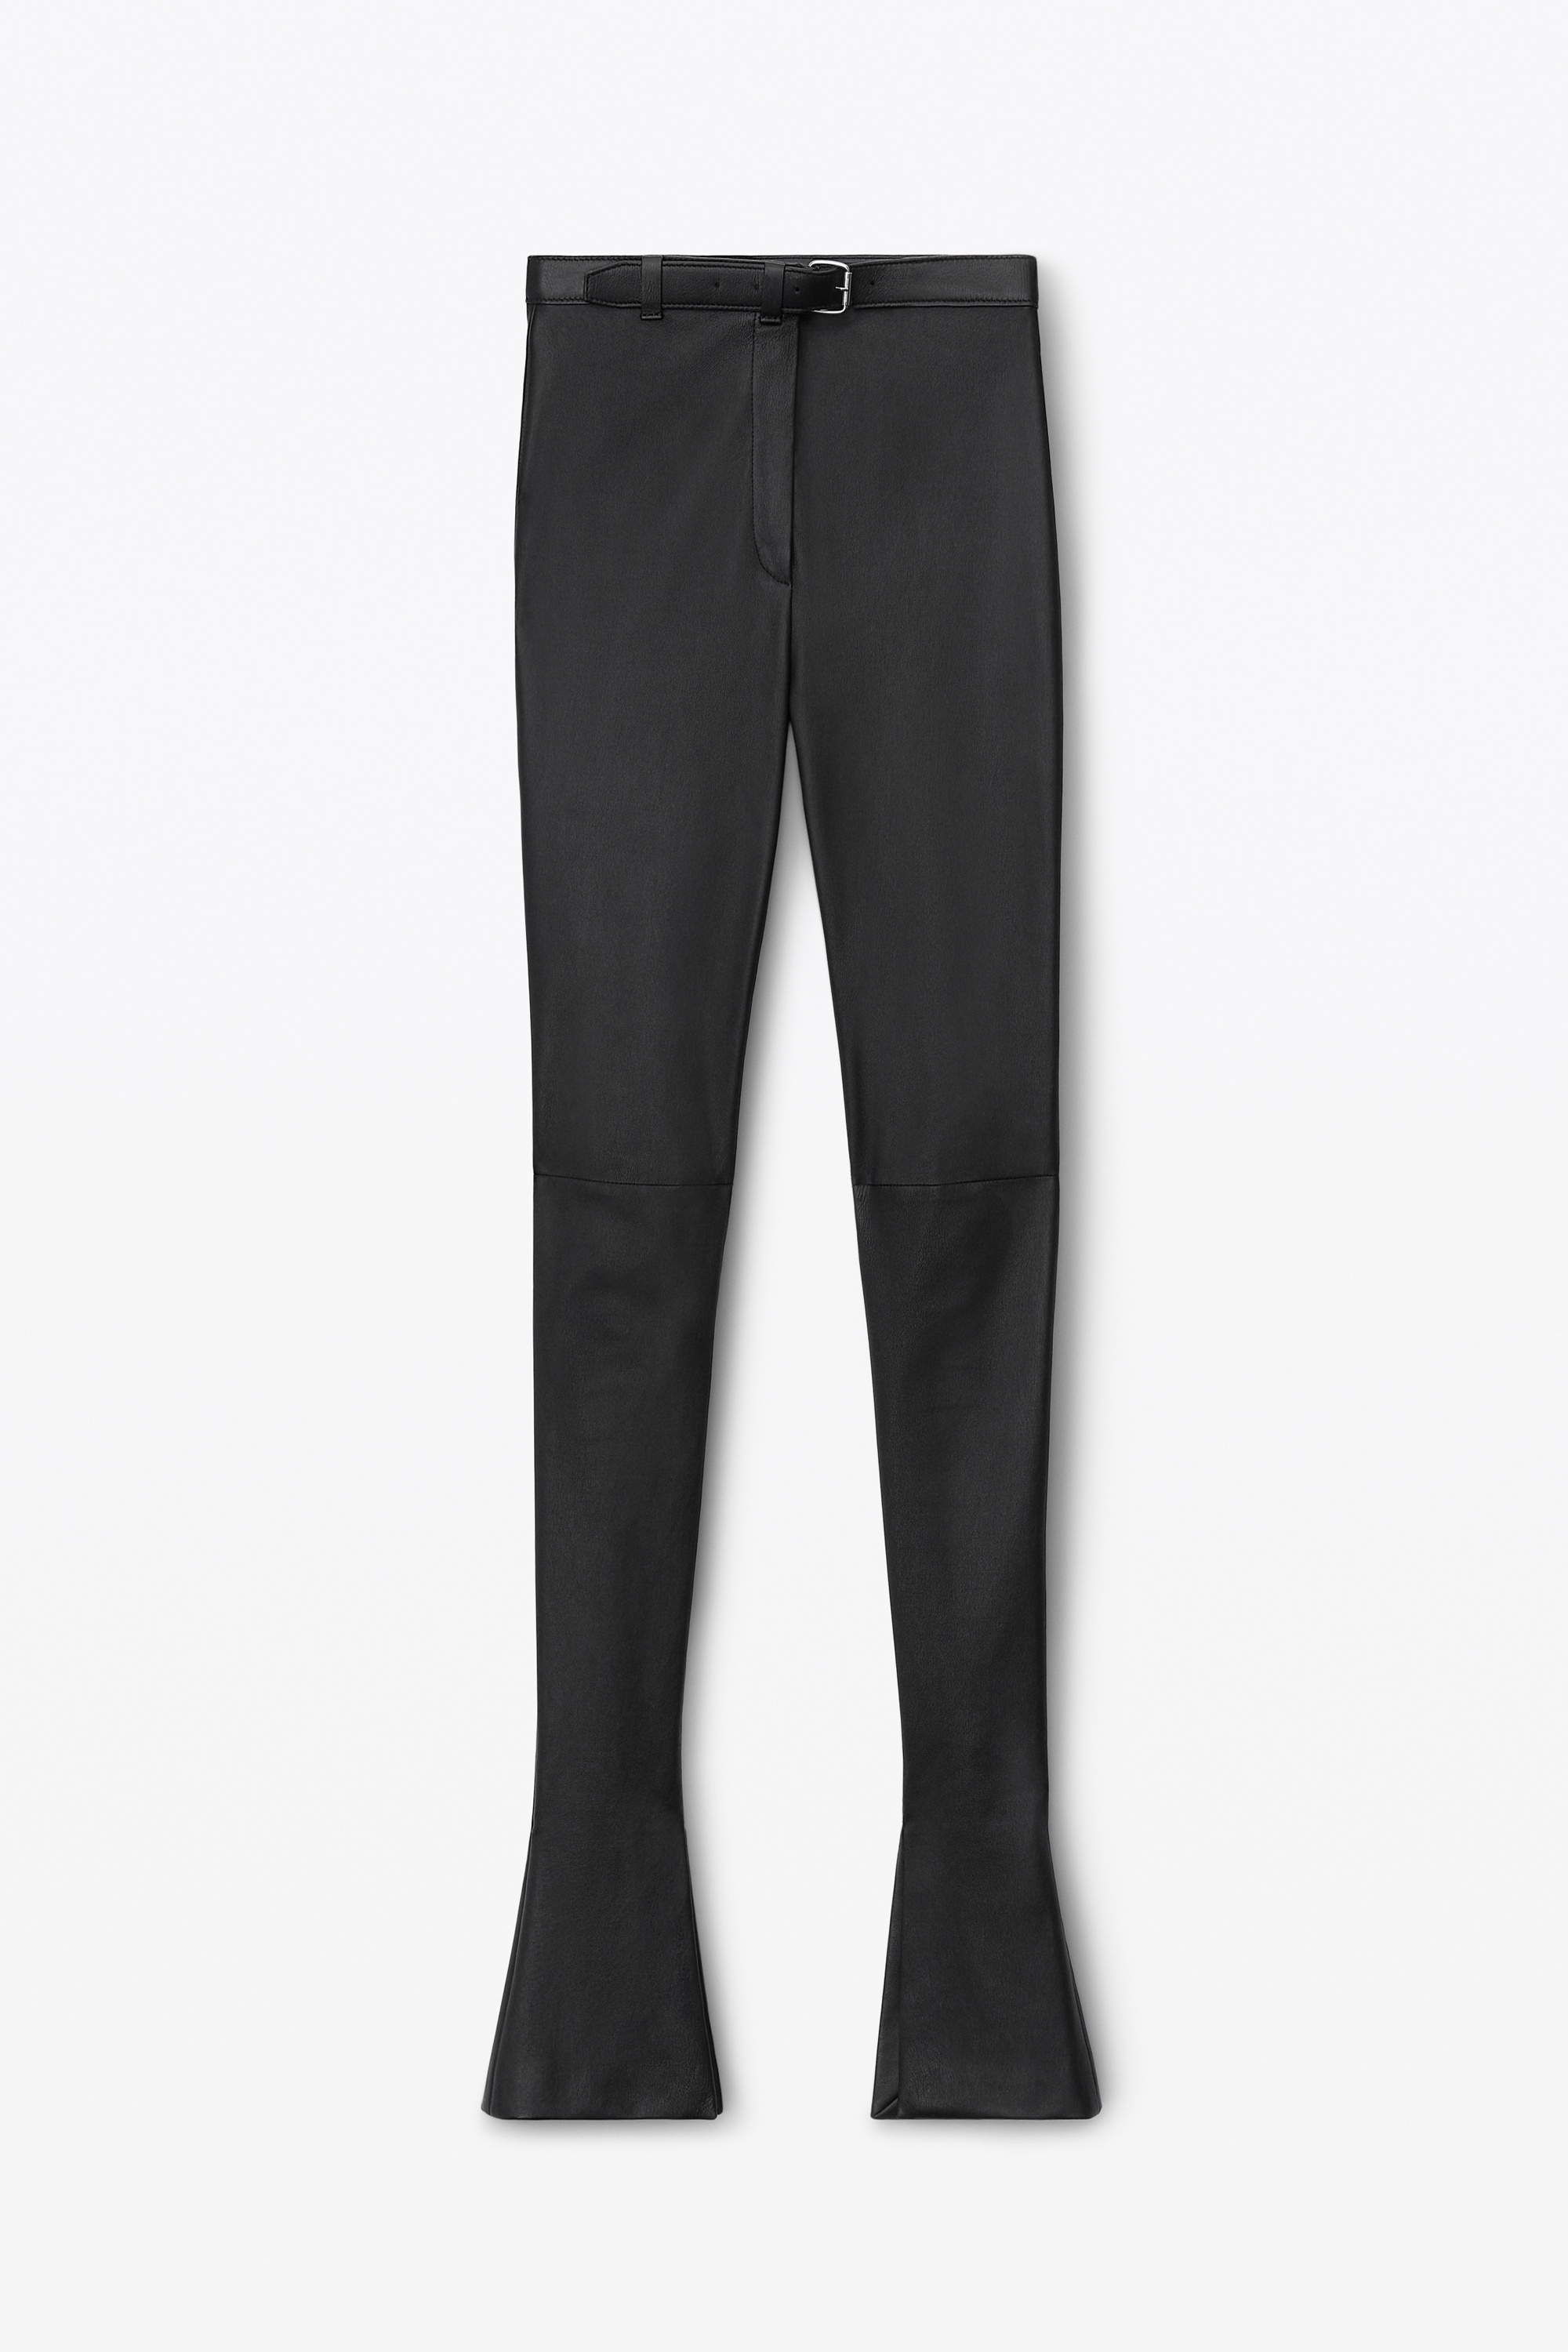 lambskin tailored legging with leather belt - 1